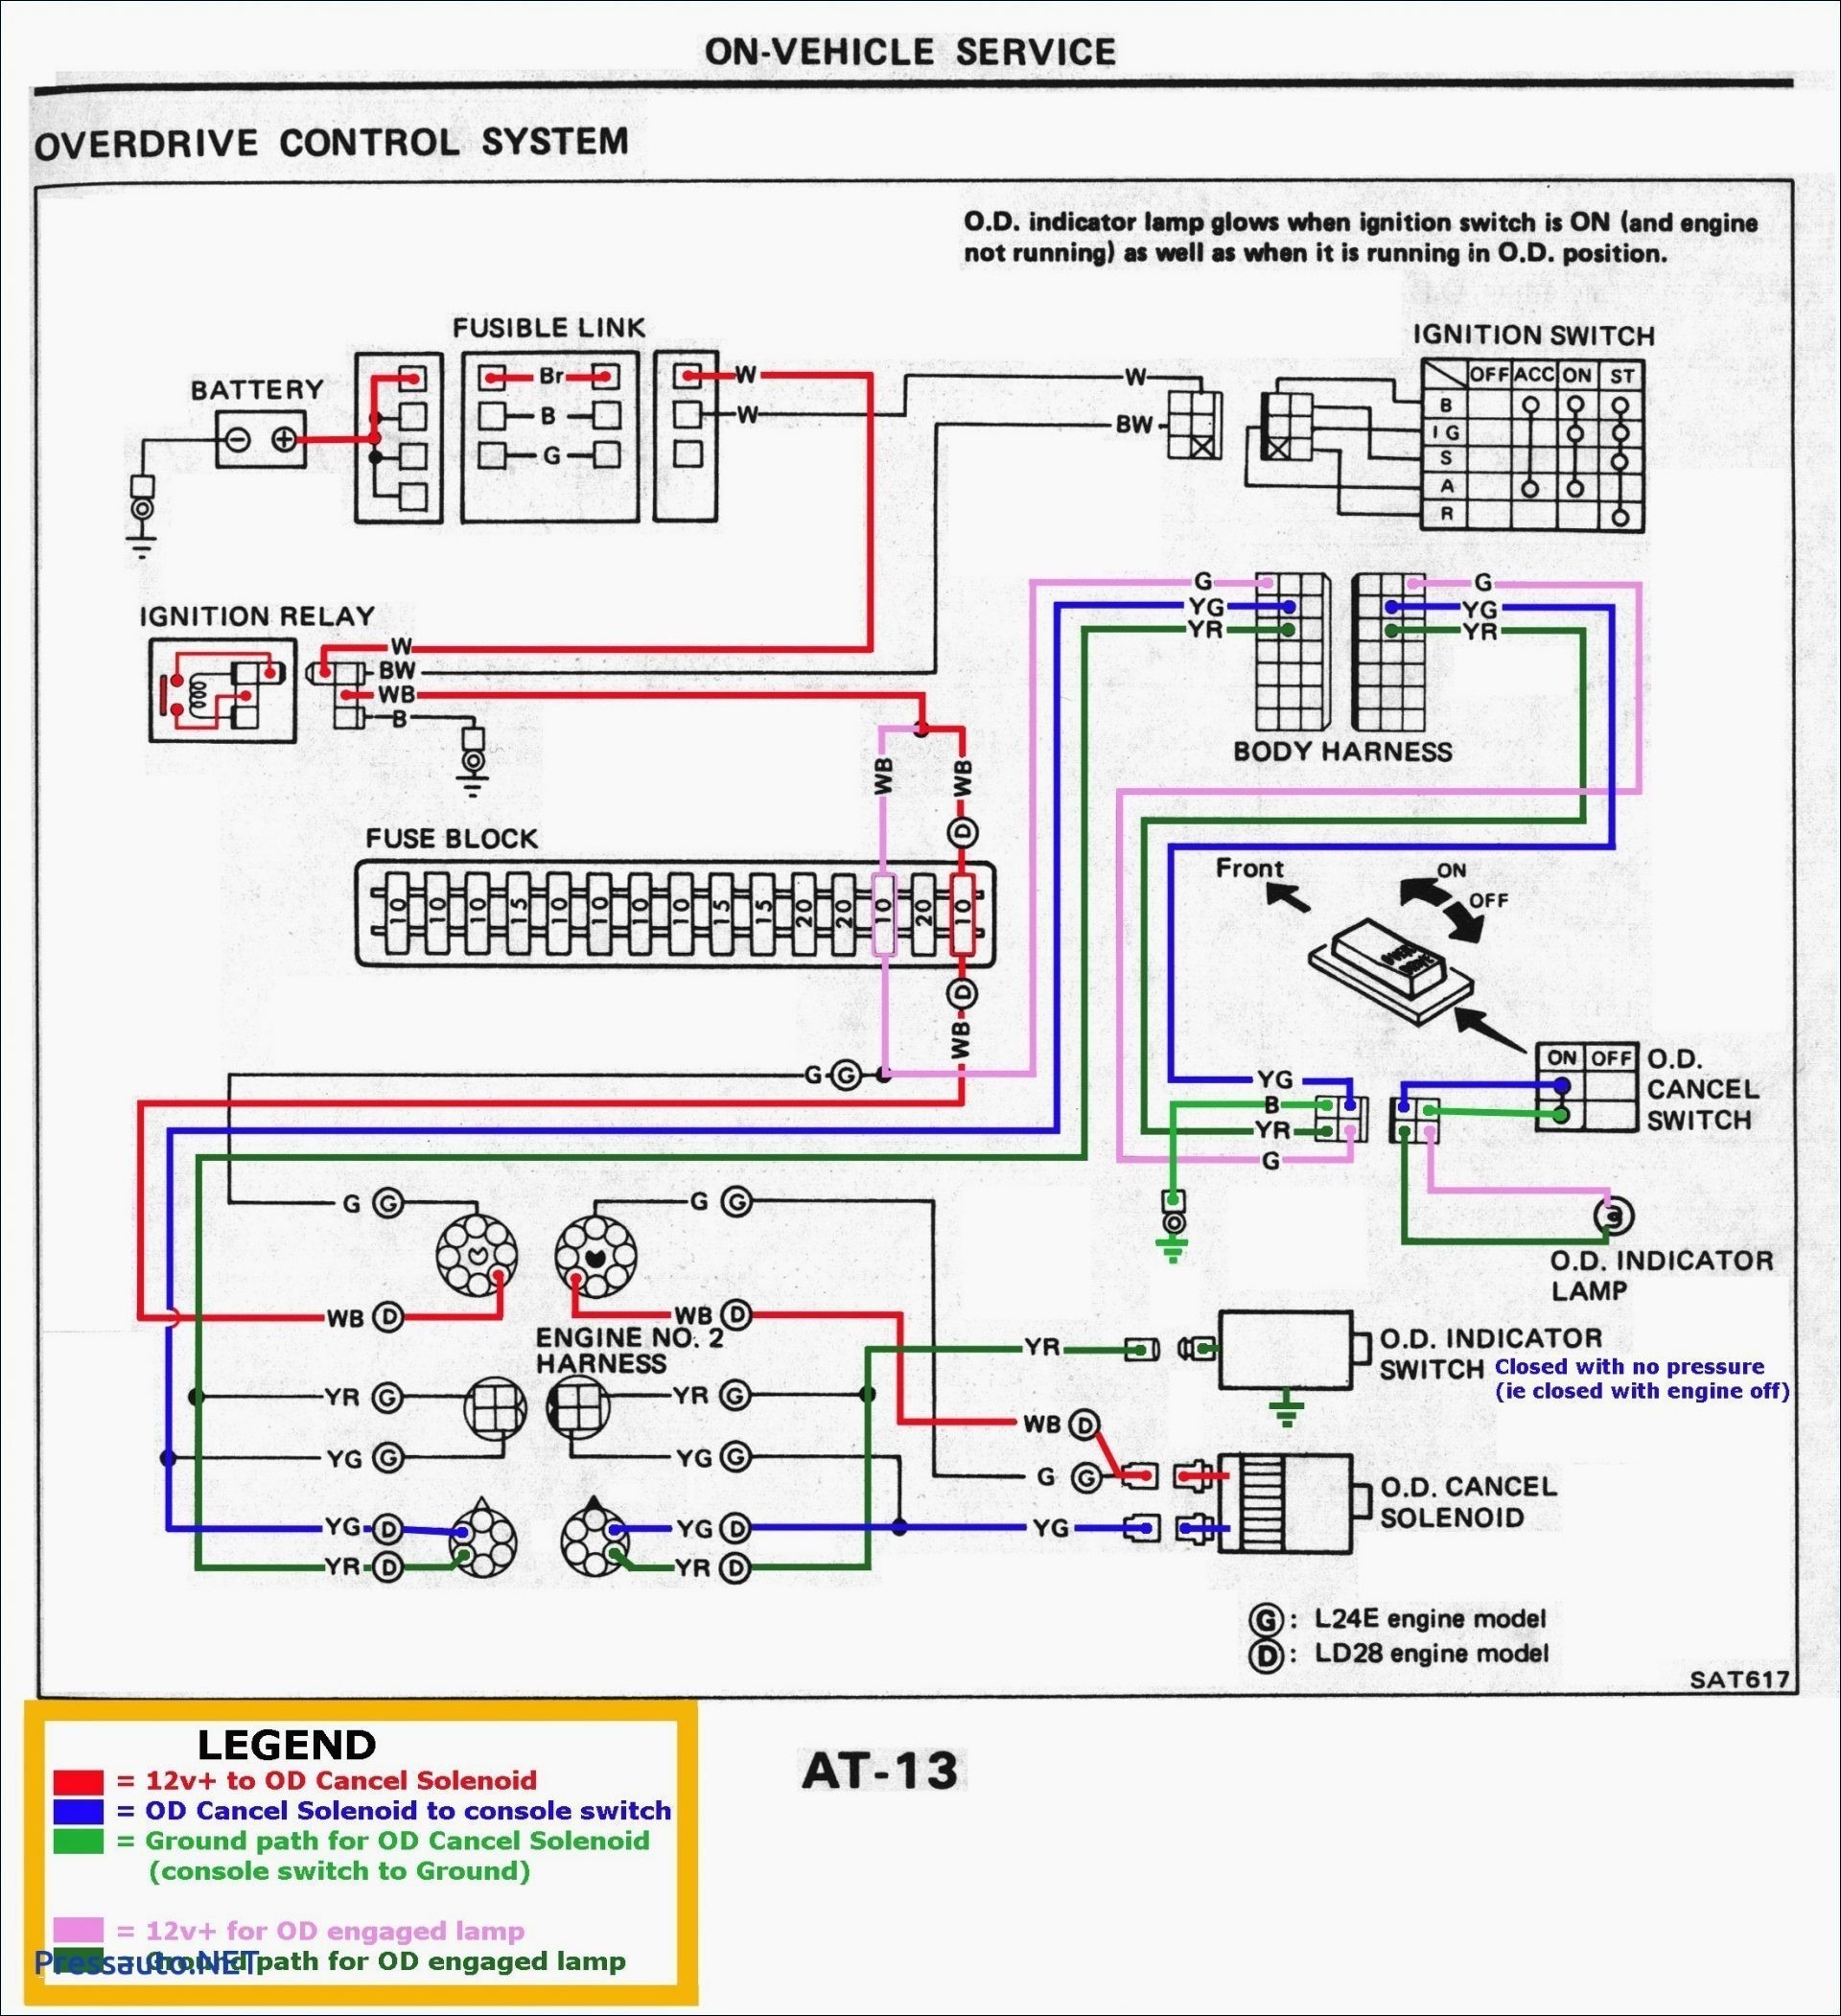 Pressure Switch for Well Pump Wiring Diagram Wiring Diagram Well Pump Pressure Switch Archives Balnearios Of Pressure Switch for Well Pump Wiring Diagram